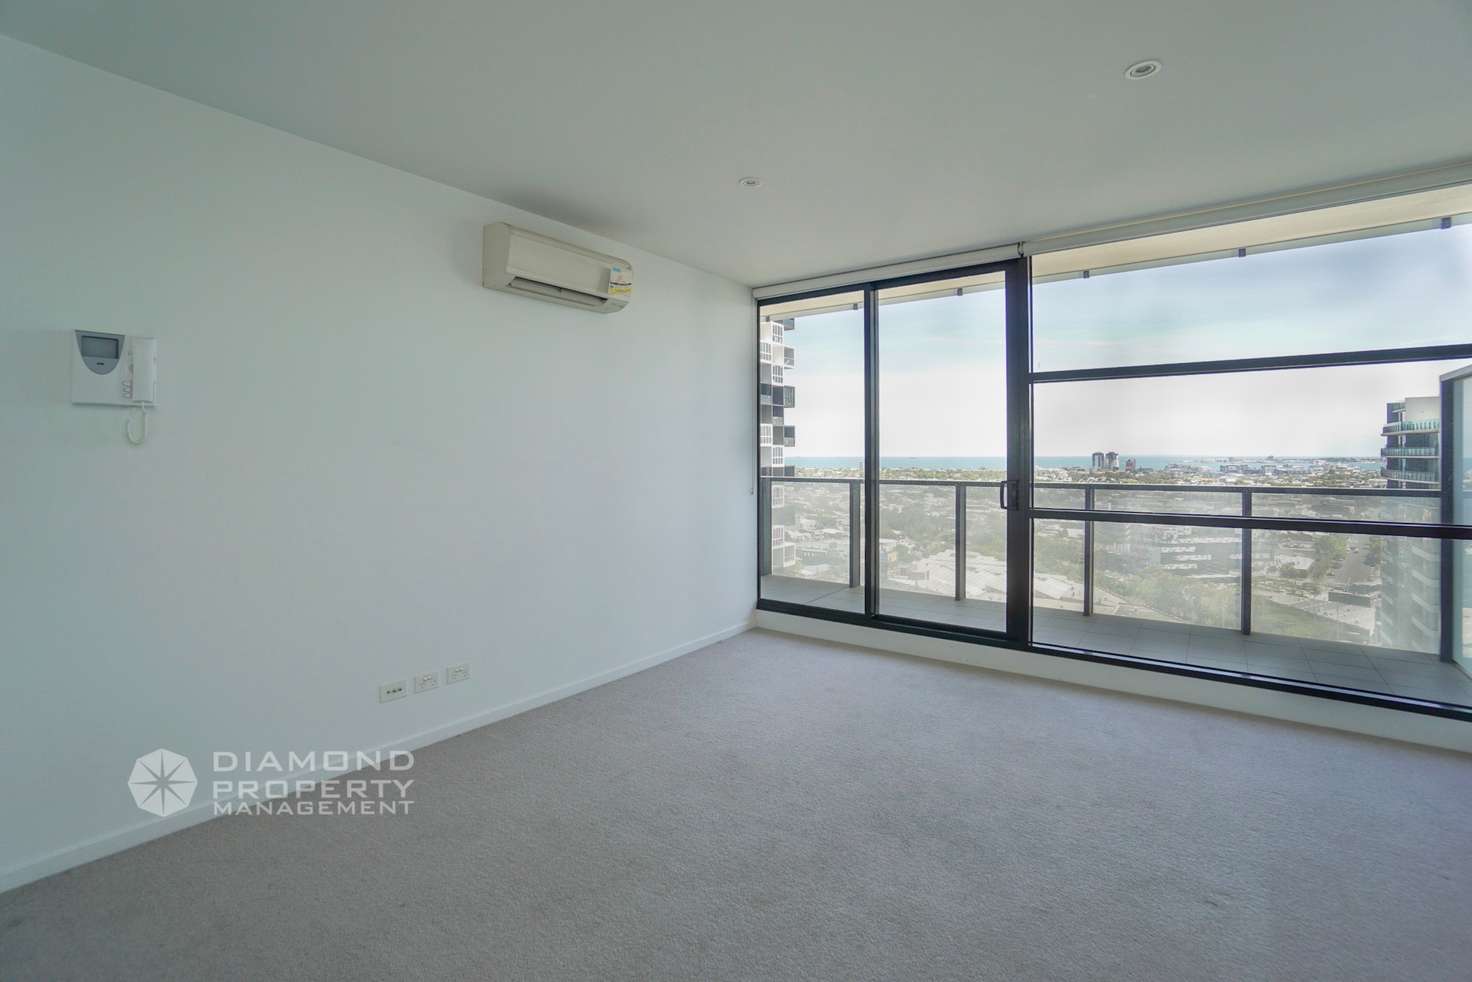 Main view of Homely apartment listing, 2005/50 Haig Street, Southbank VIC 3006